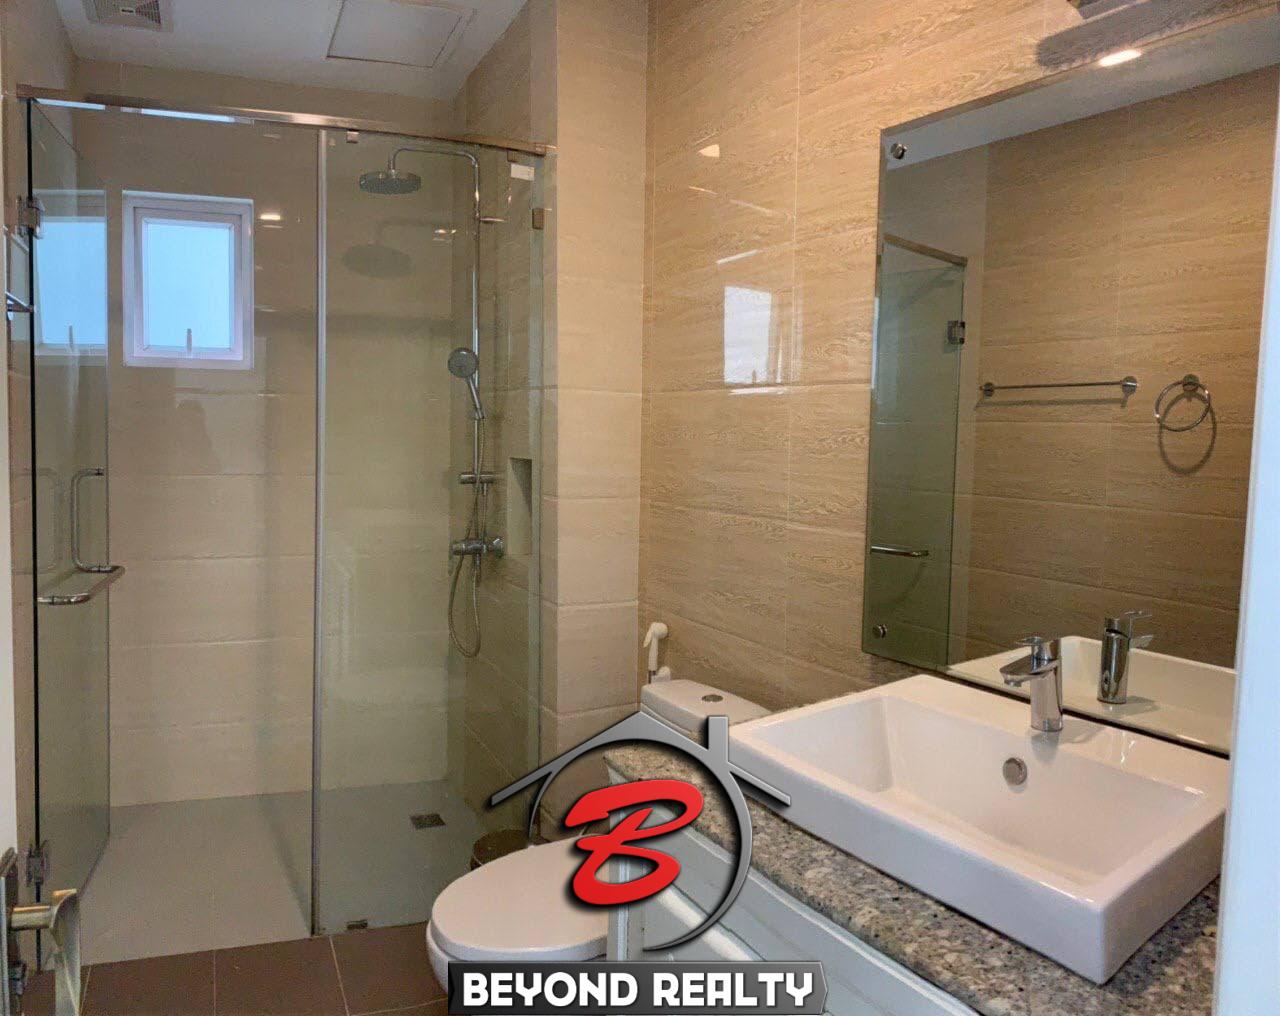 the bathroom fo the the living room of the 1br serviced apartment for rent in Boeung Trabek in Chamkar Mon Phnom Penh Cambodia